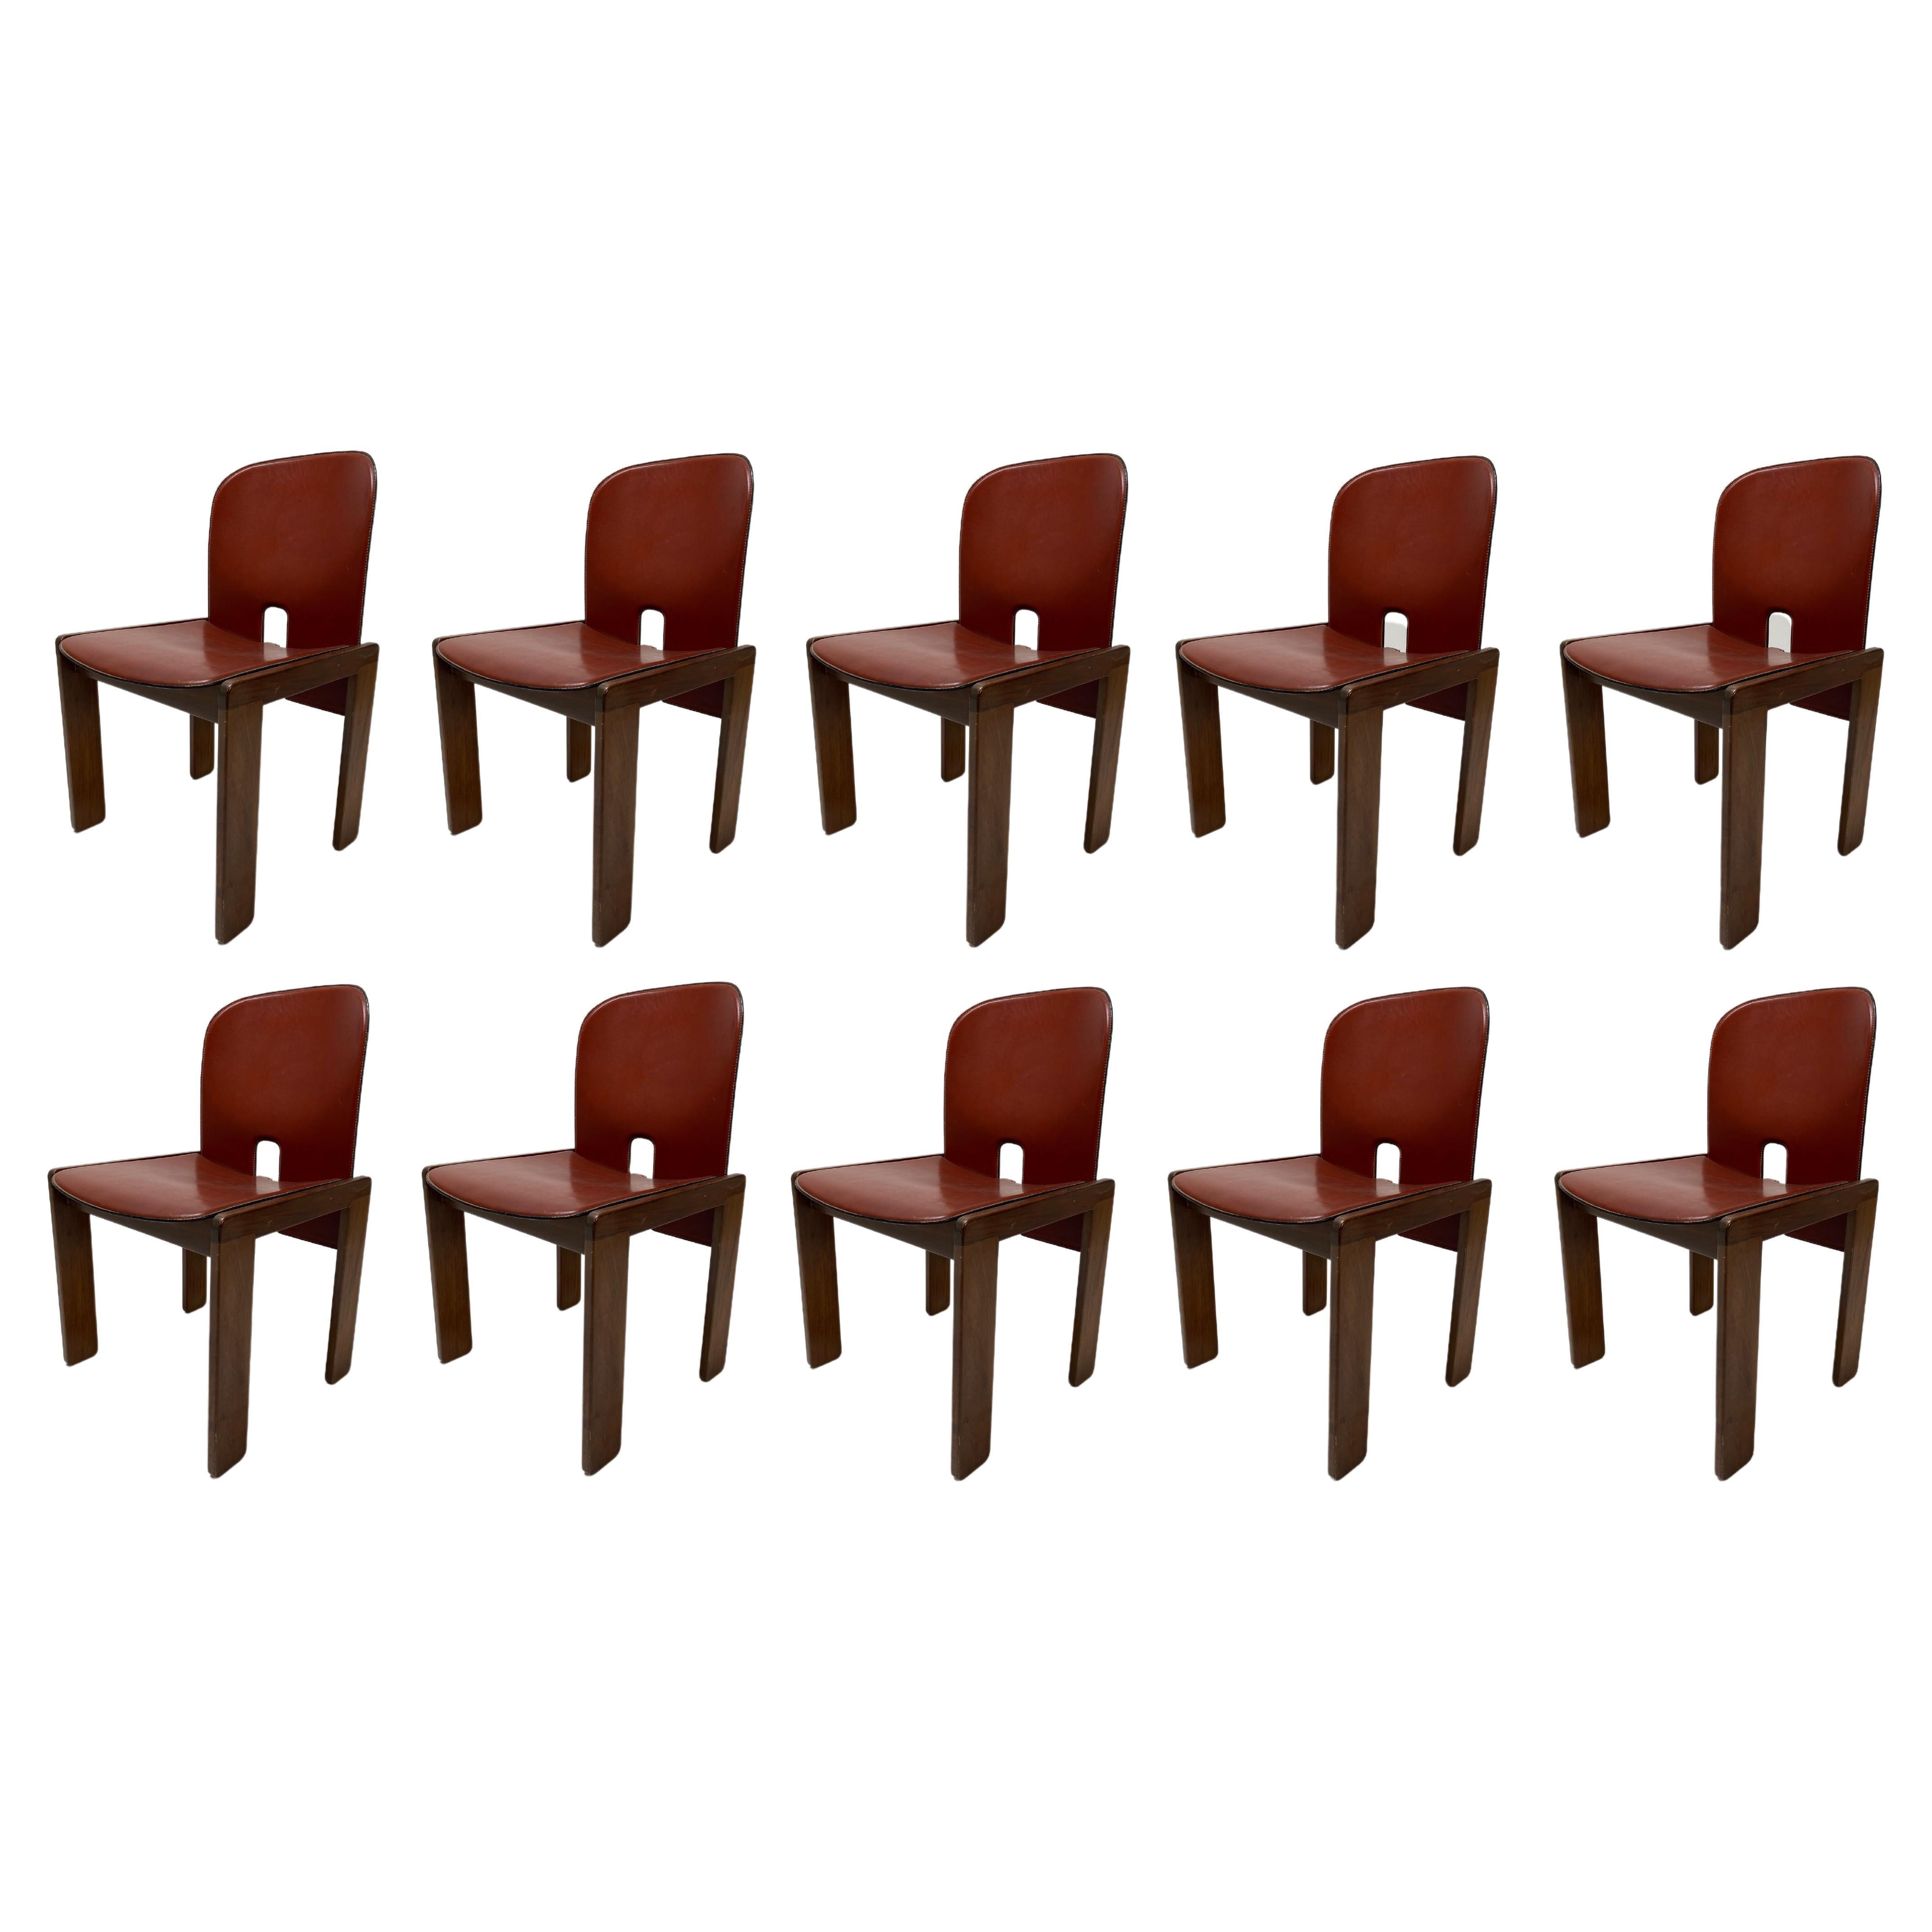 Set of 10 Red Lether 121 Chairs, Afra & Tobia Scarpa, Cassina, Italy, 1967 For Sale